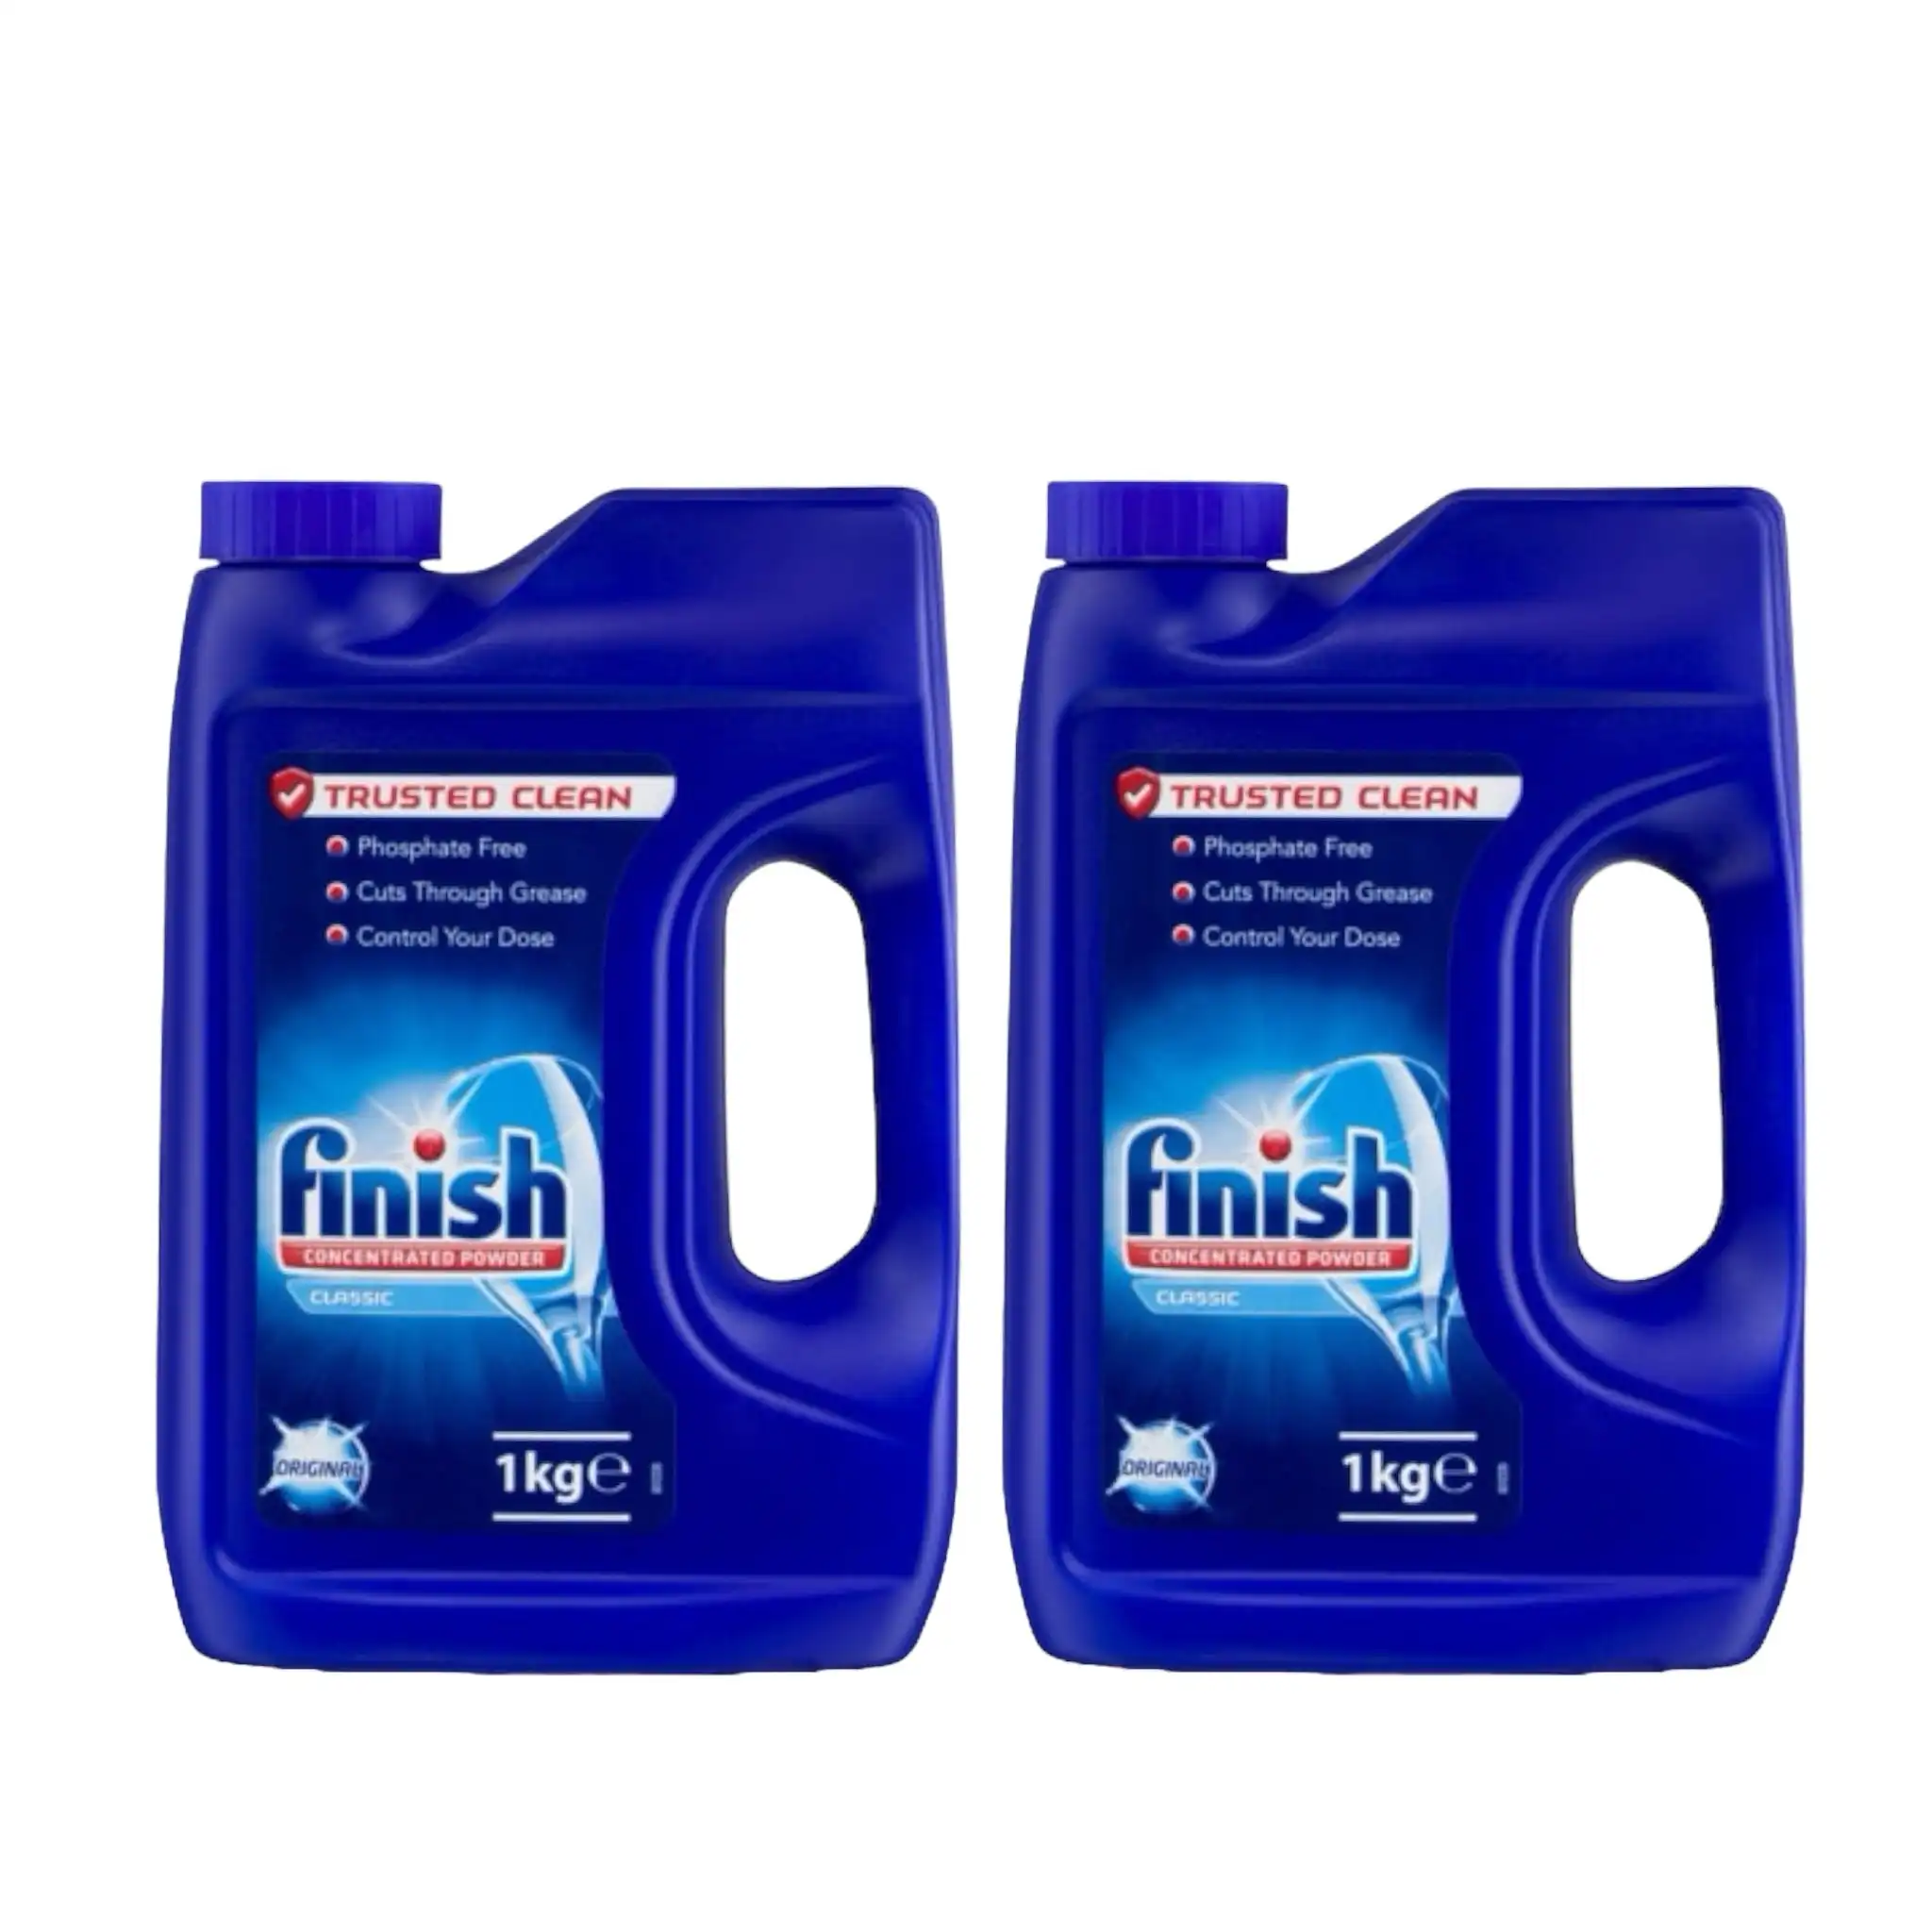 2 Pack Finish Classic Powder Concentrate 1kg